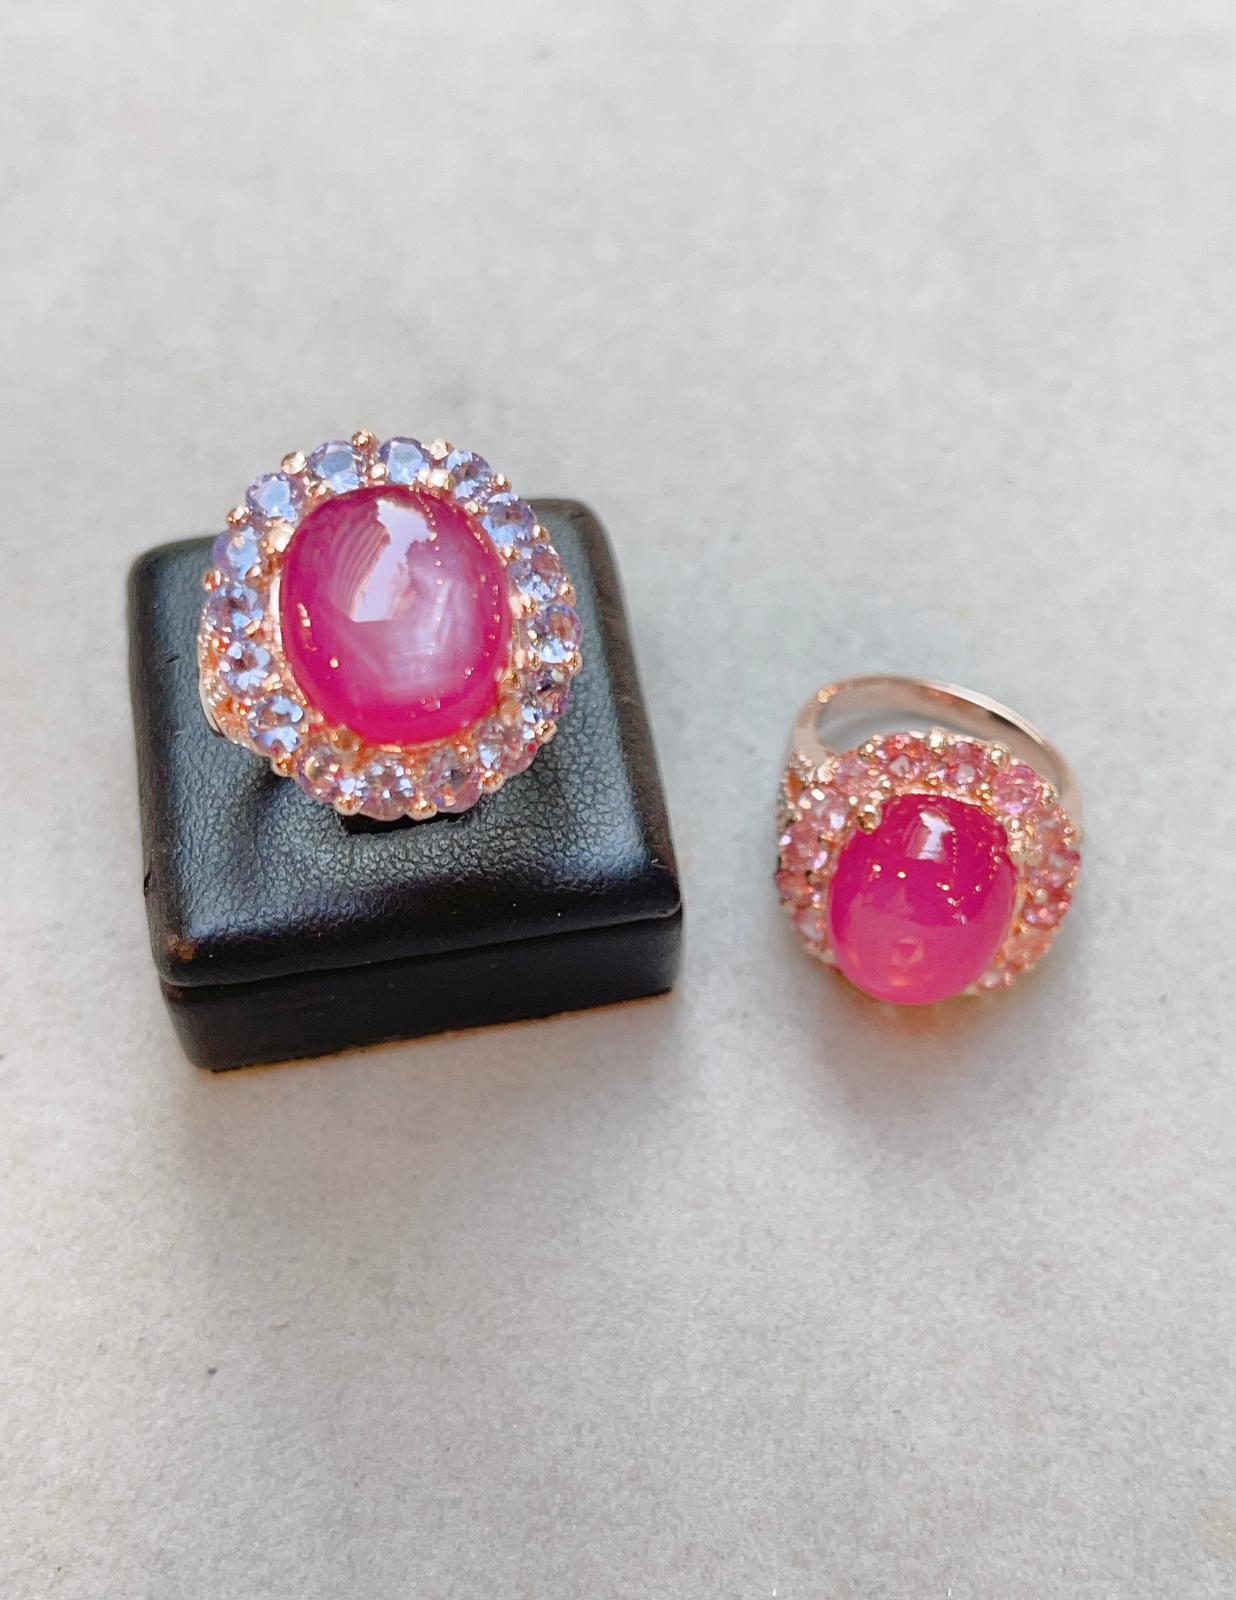 Cabochon Bochic “Capri” Star Ruby Cocktail Ring with Natural Pink Sapphires For Sale